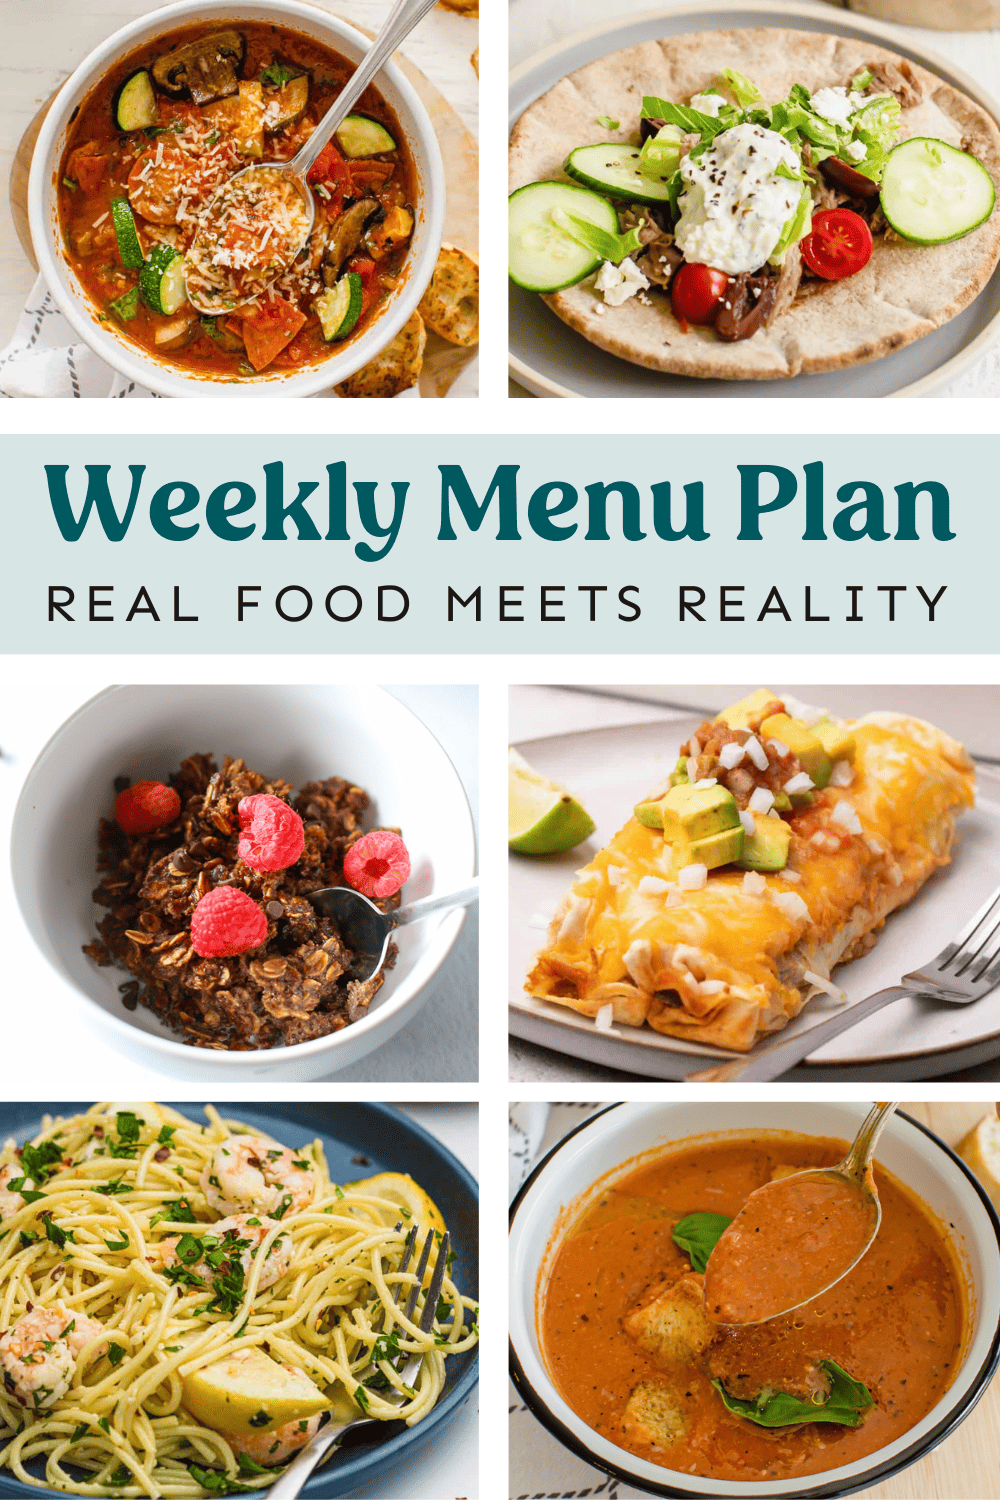 Collage of meals from the weekly menu plan.